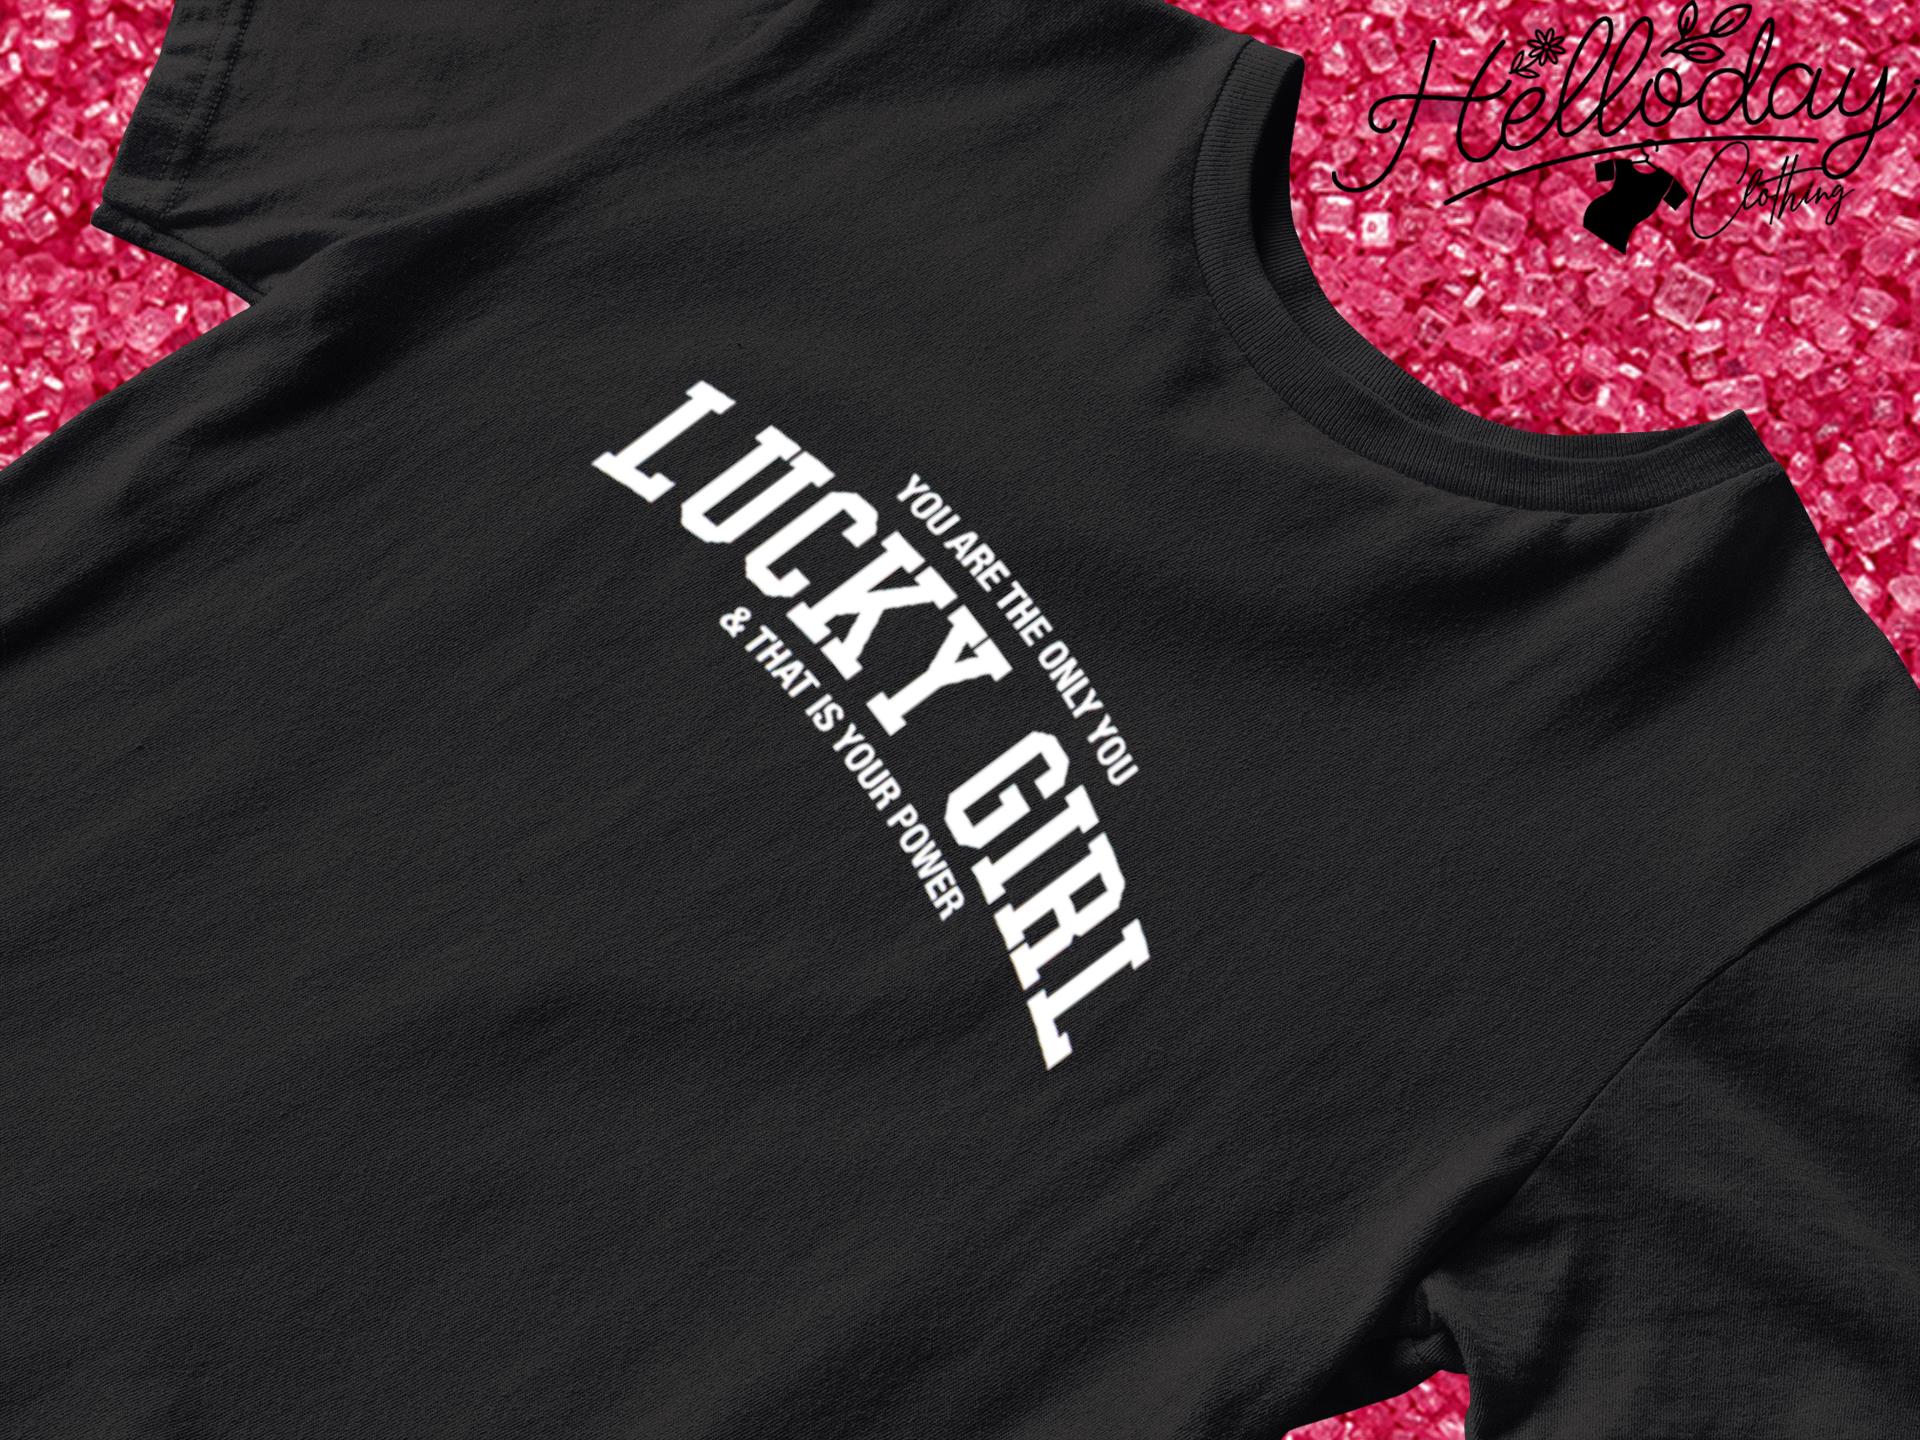 You are the only you lucky girl and that is your power shirt